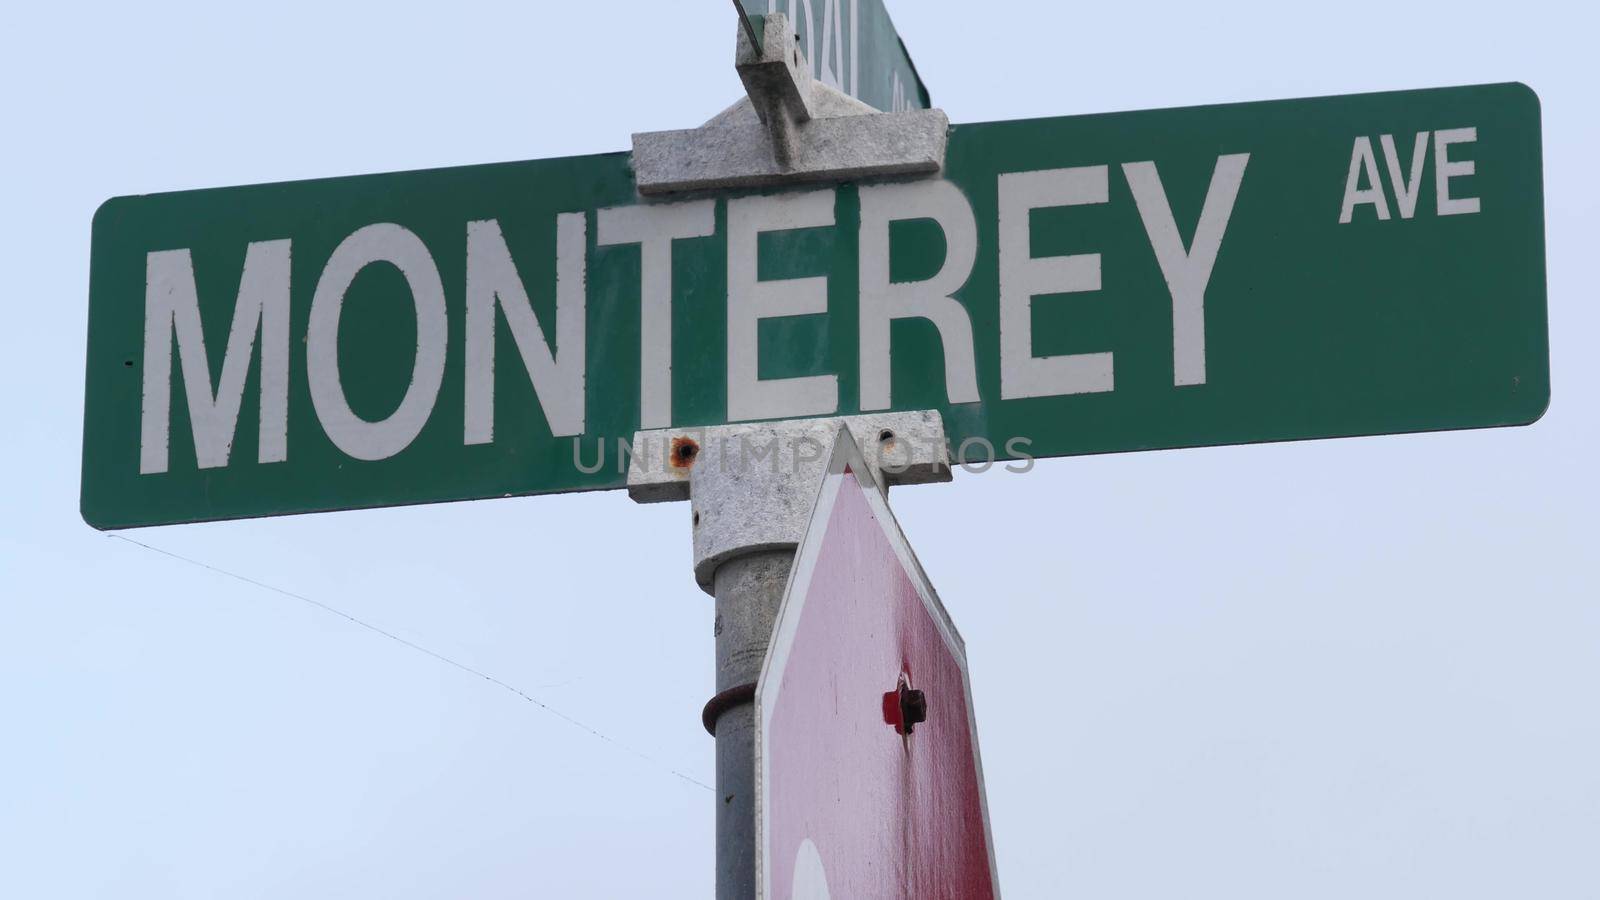 Monterey road sign, California street crossroad, USA. Tourist resort, historic capital. Waterfront travel destination for coastal summer vacations. 17-mile drive, Bay Aquarium and Cannery Row city.